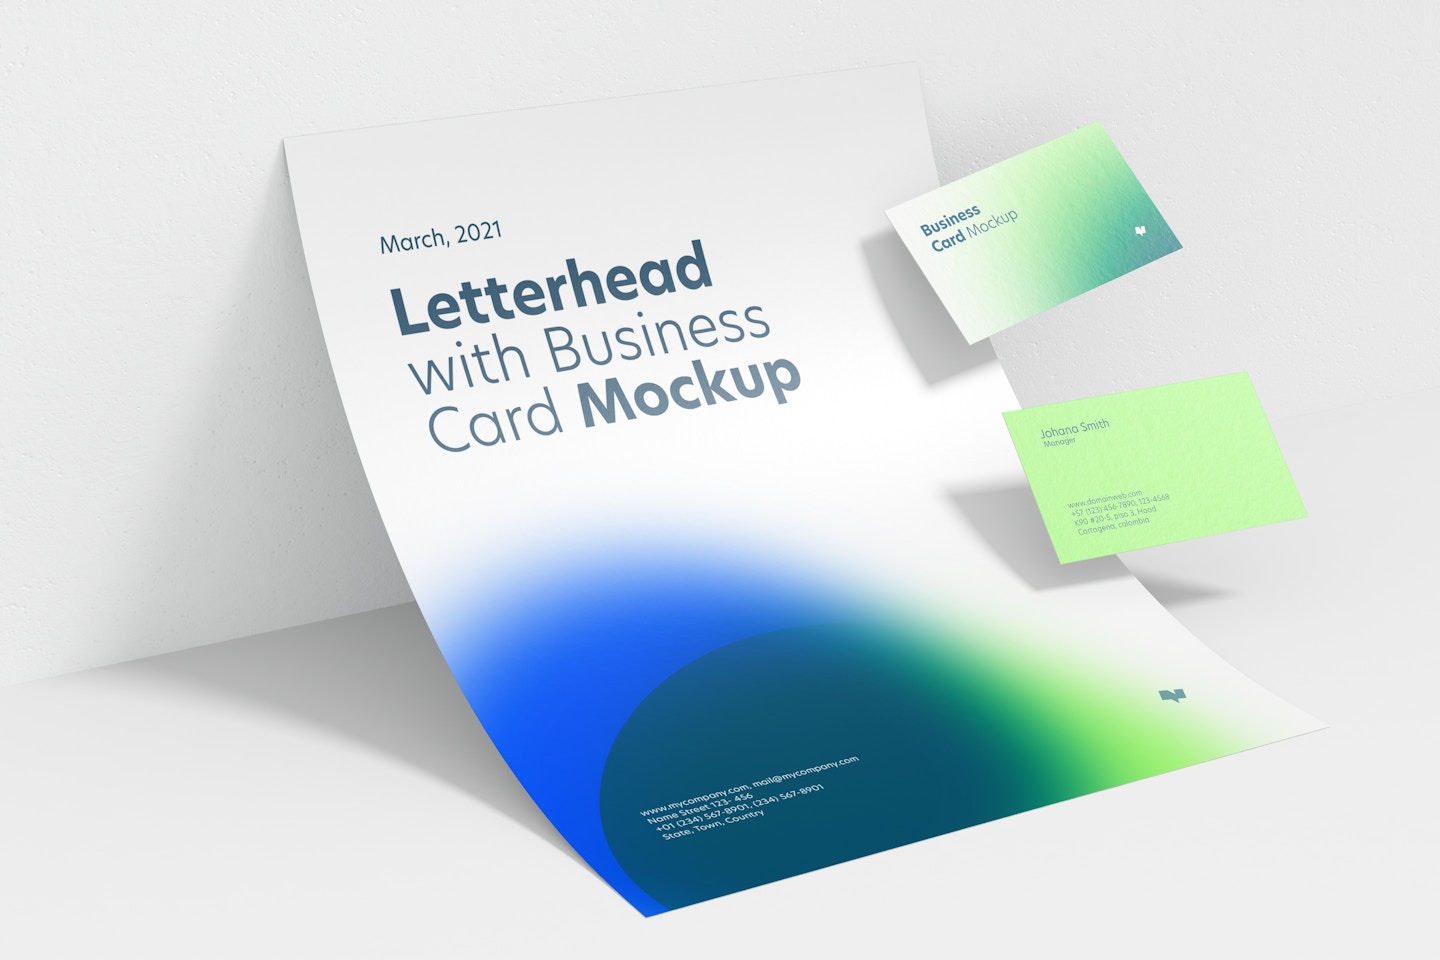 Letterhead with Business Card Mockup, Leaned